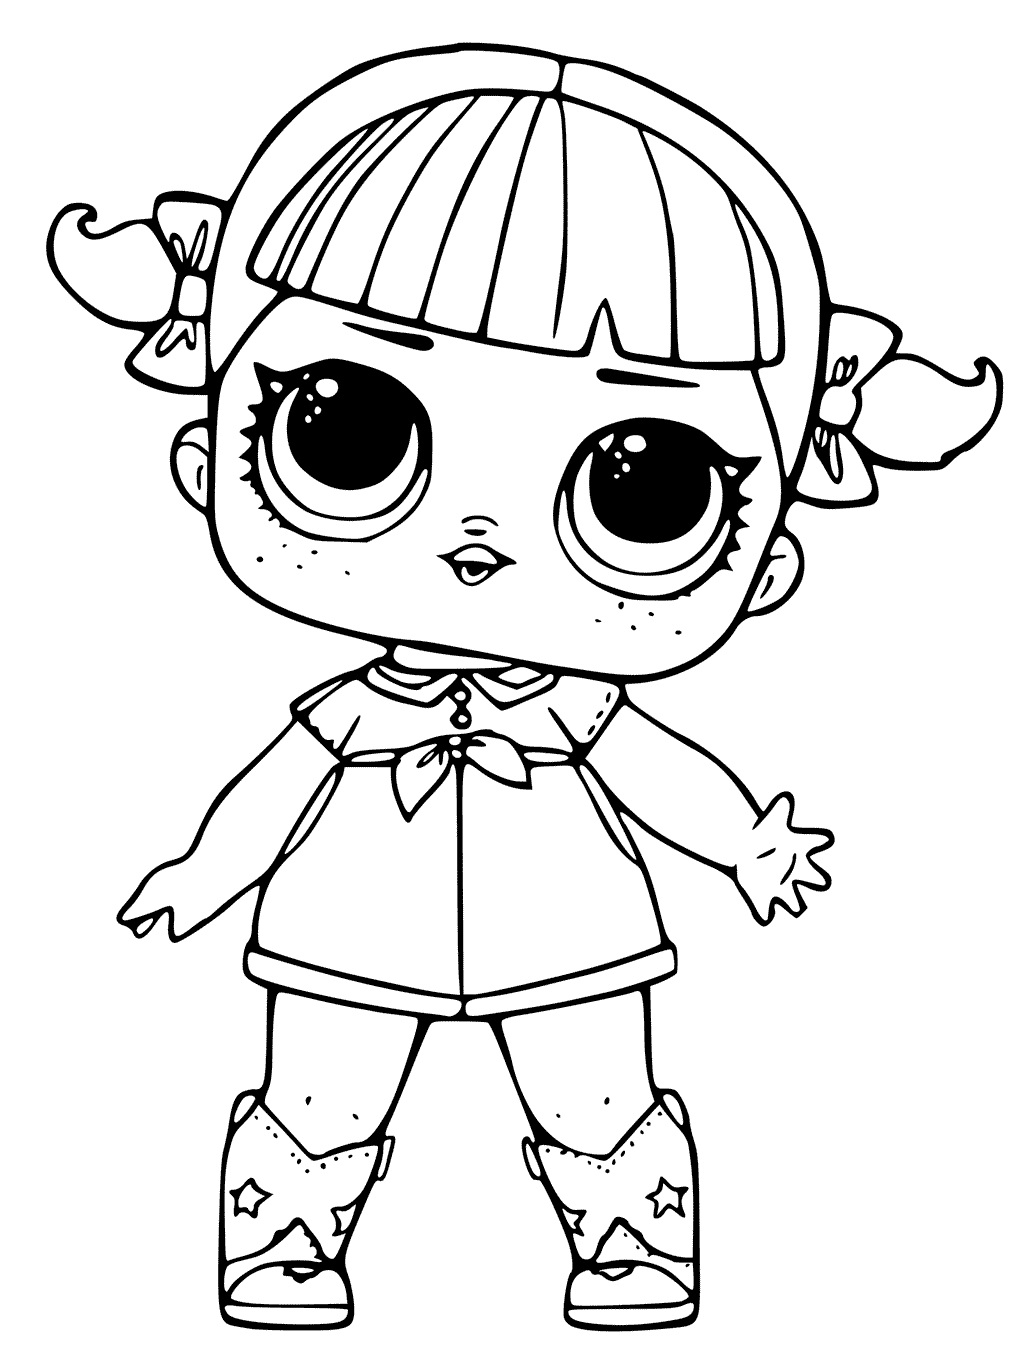 LOL Surprise Dolls Coloring Pages. Print Them for Free ...